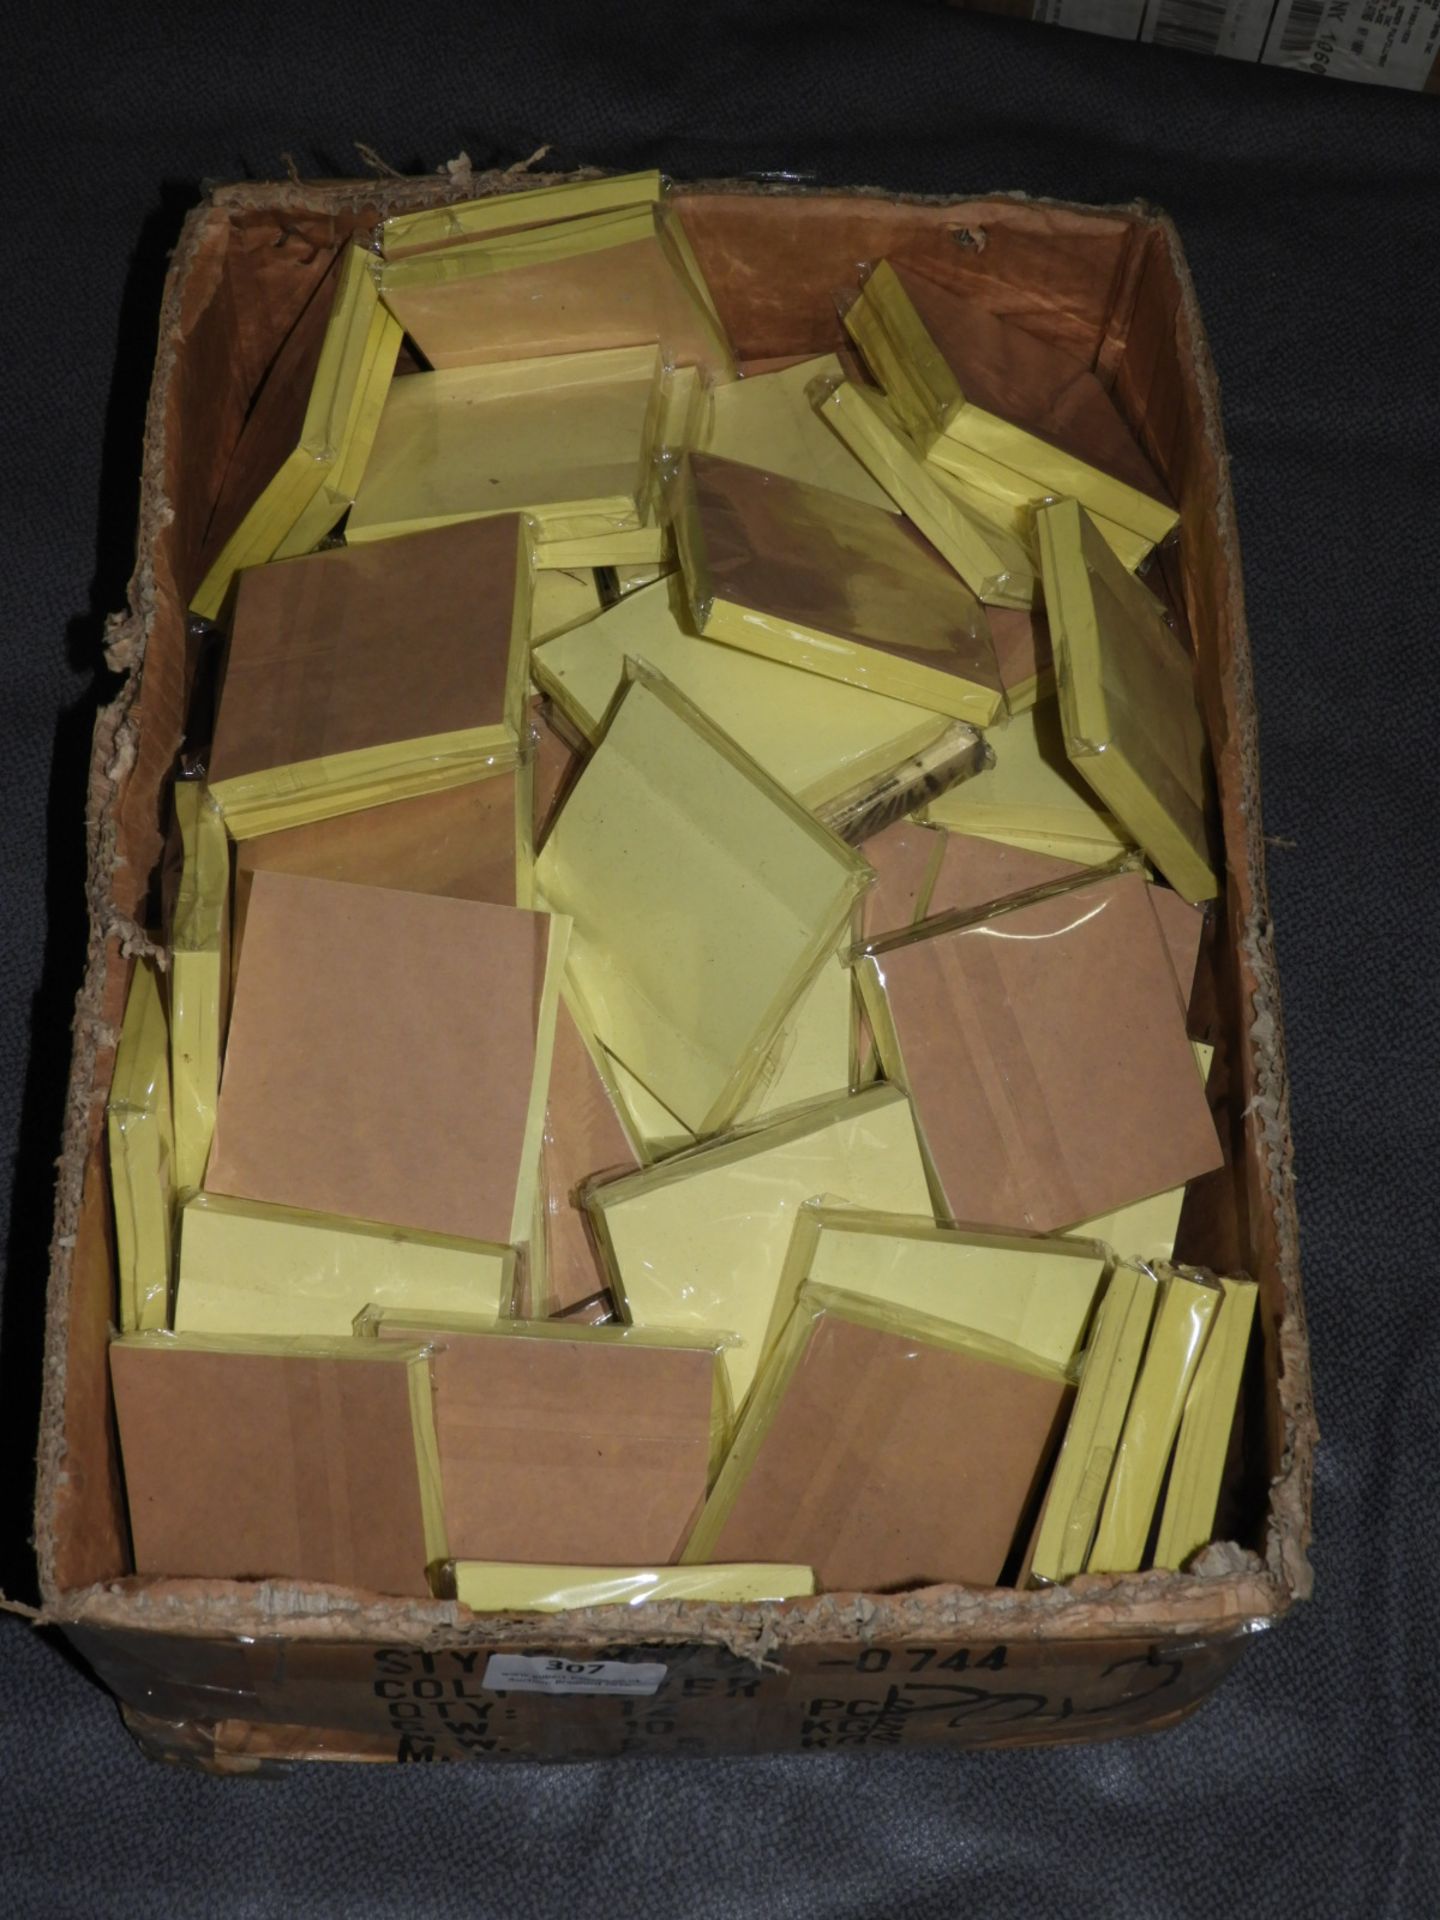 Box Containing a Quantity of Yellow Post-it Notes